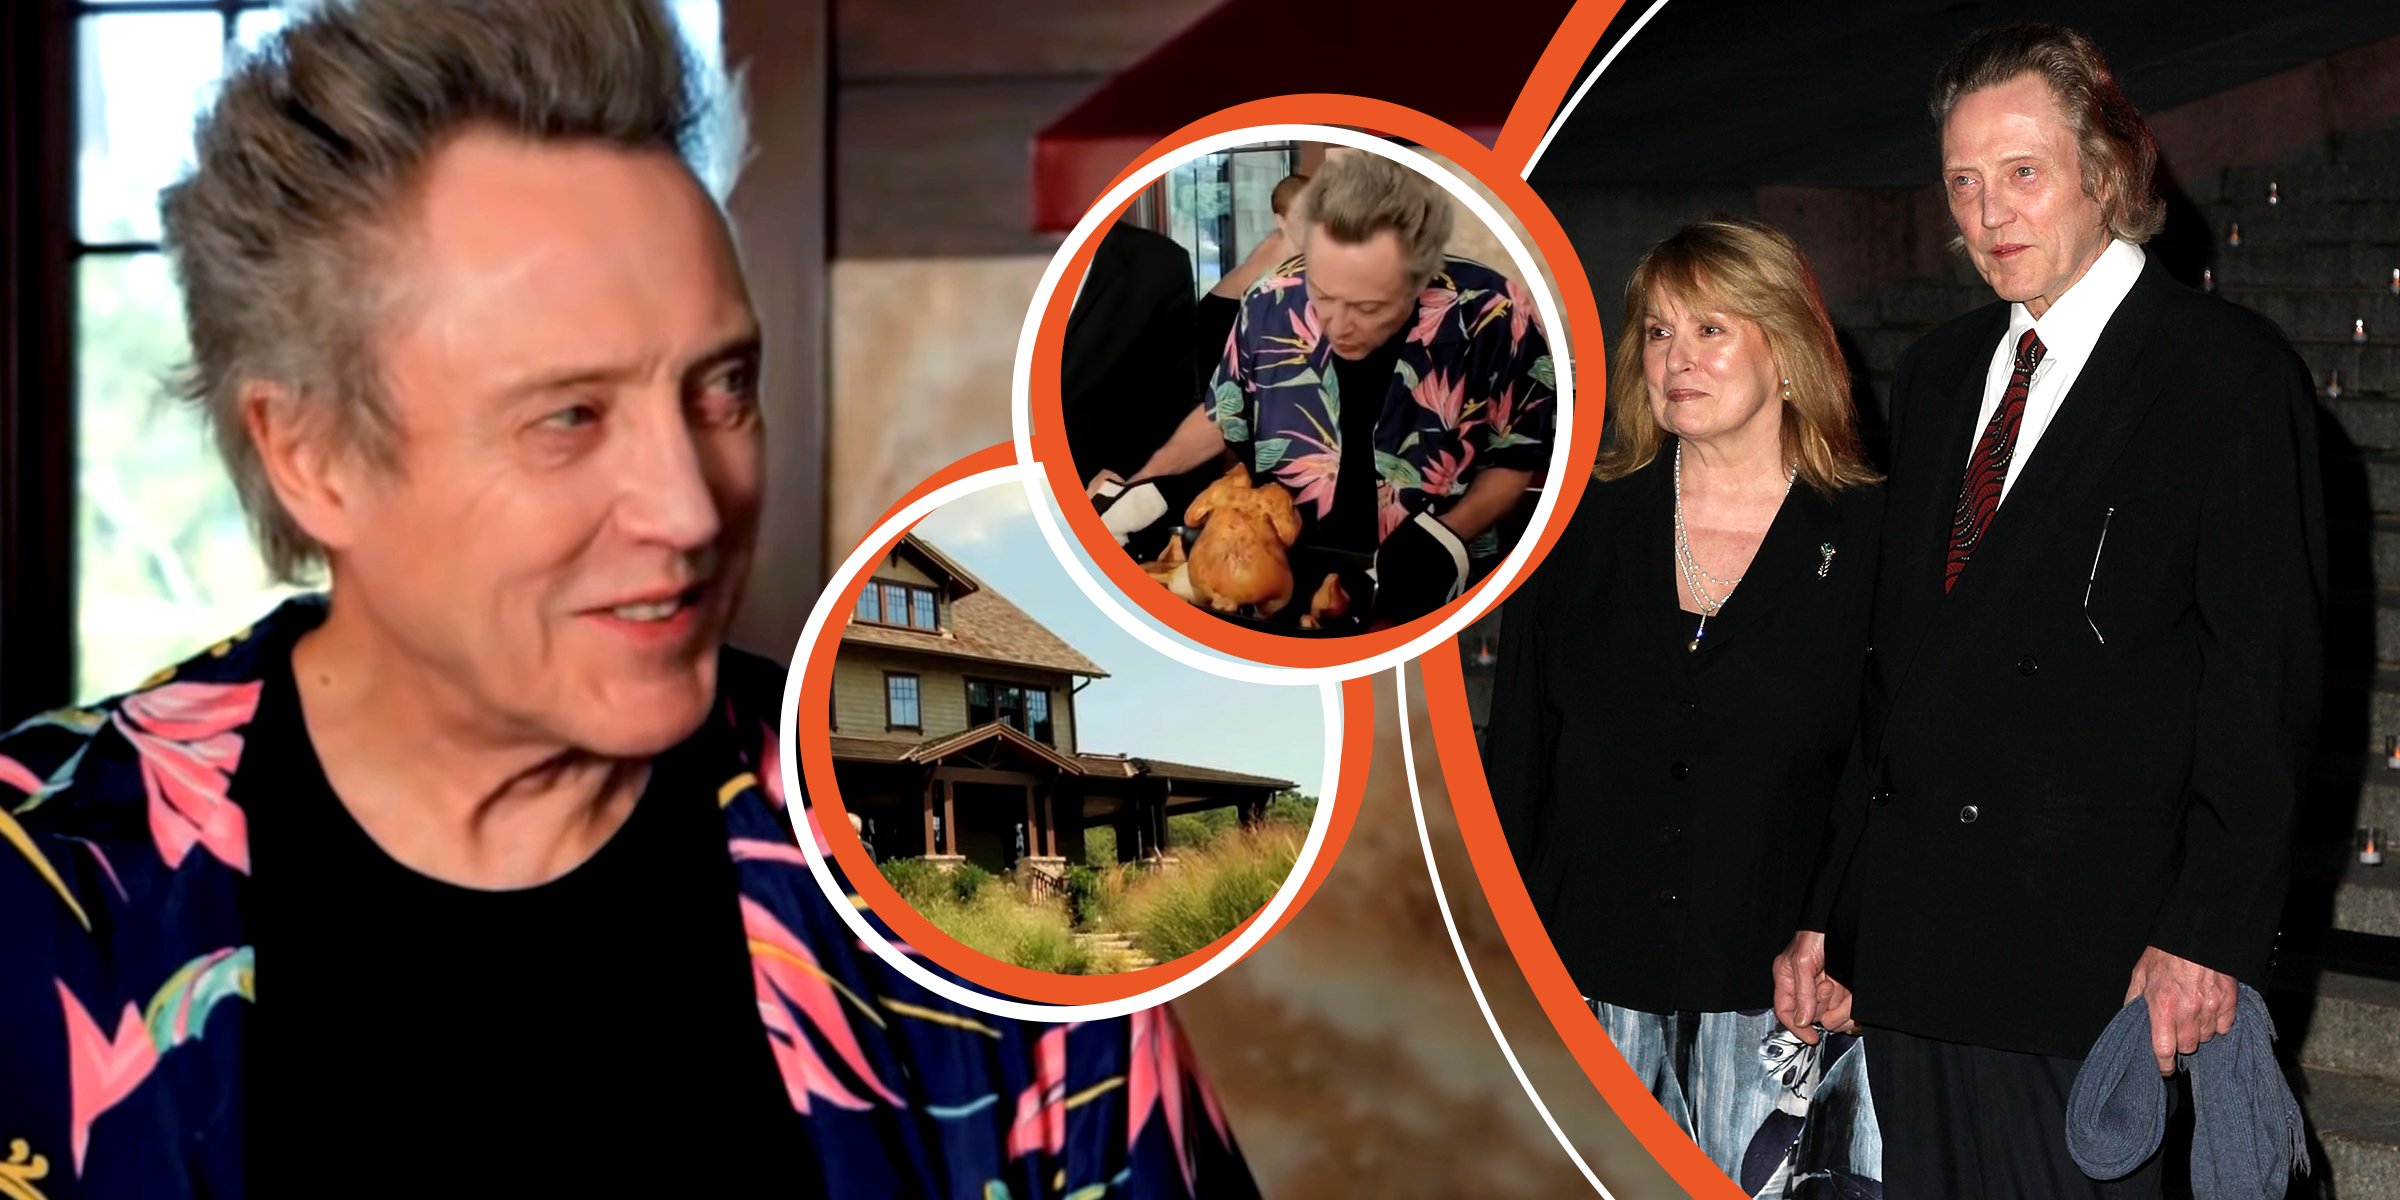 Christopher Walken | Georgianne and Christopher Walken | Christopher Walken | Christopher Walken's Connecticut home | Source: www.youtube.com/c/FunnyOrDie | Getty Images